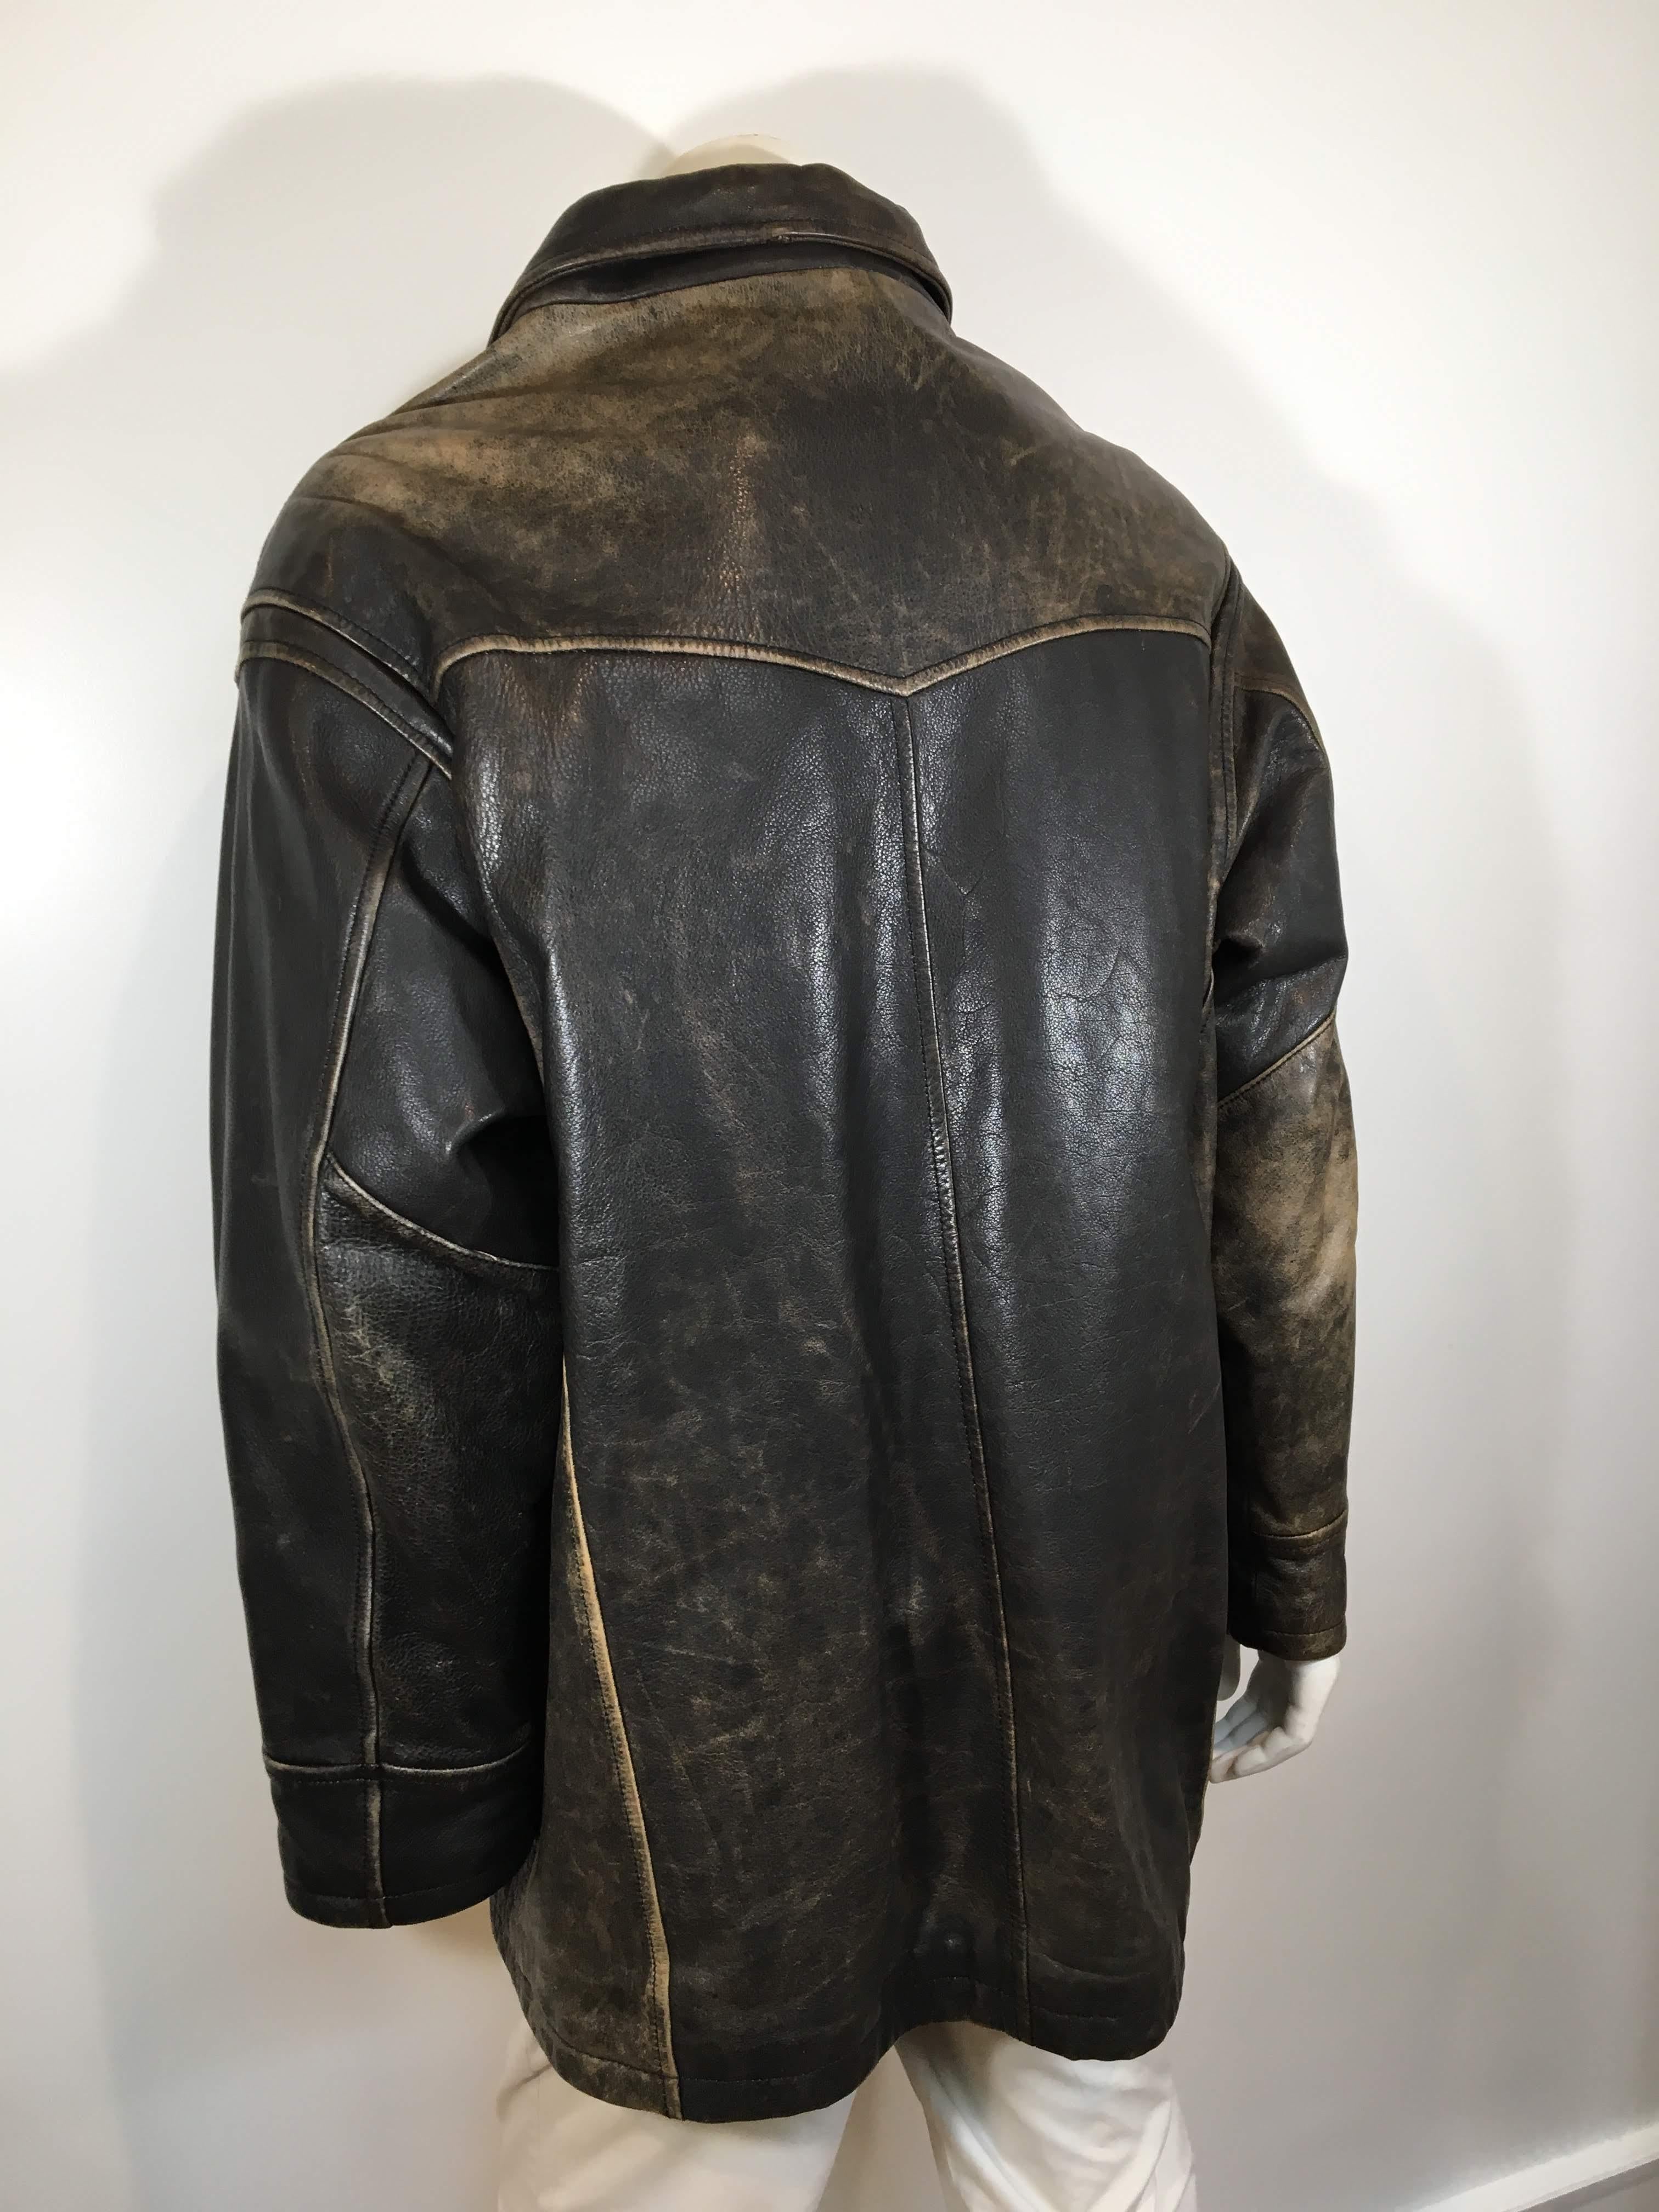 Men's Andrew Marc Faded Brown Leather jacket. 1